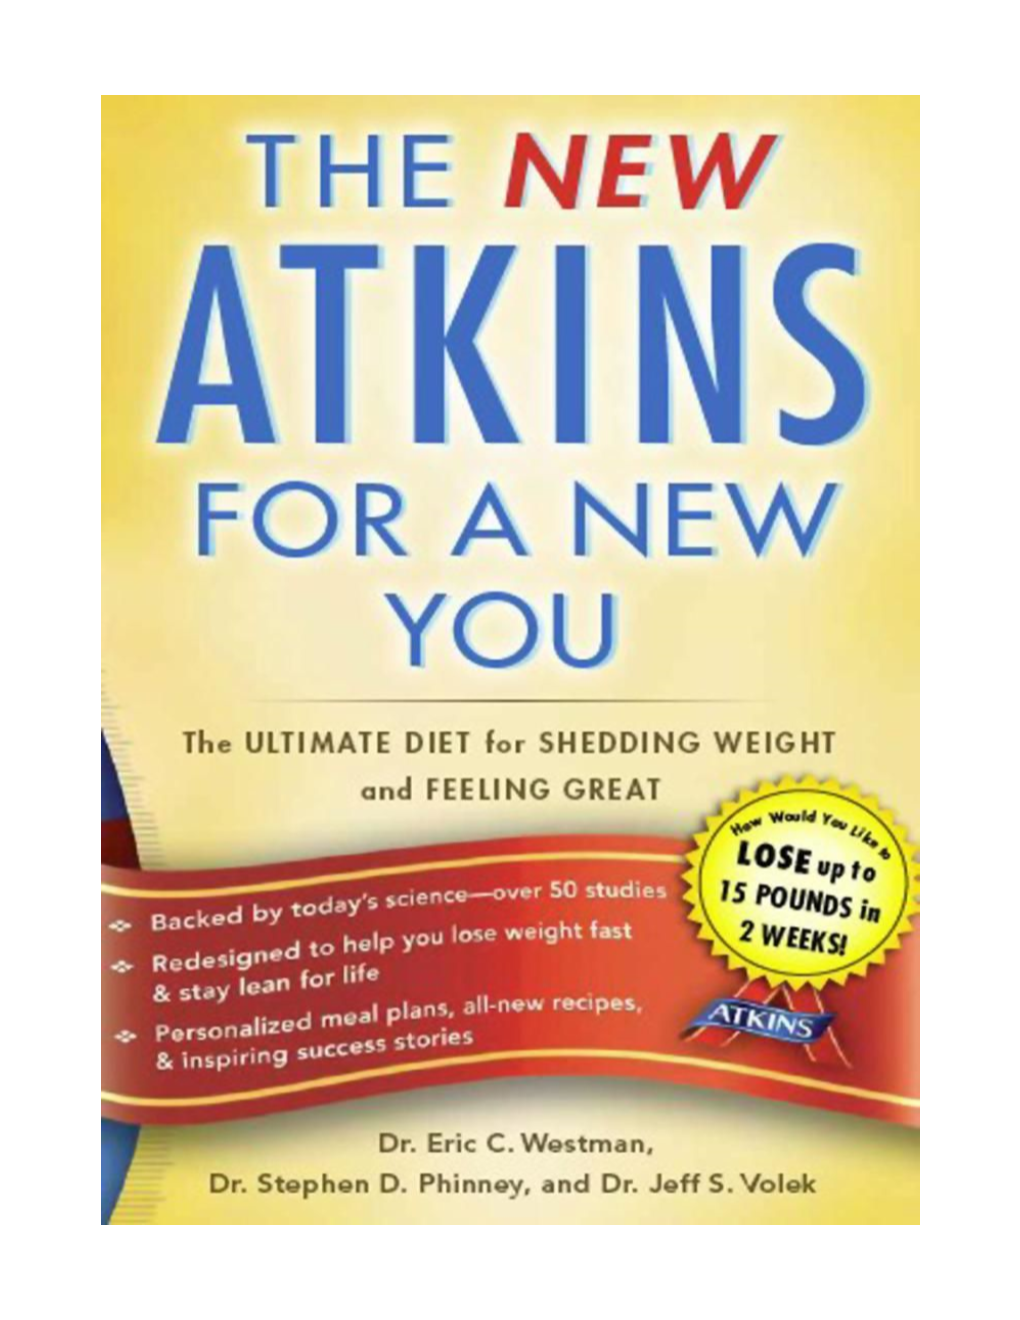 THE NEW ATKINS for a NEW YOU the ULTIMATE DIET for SHEDDING WEIGHT and FEELING GREAT Dr